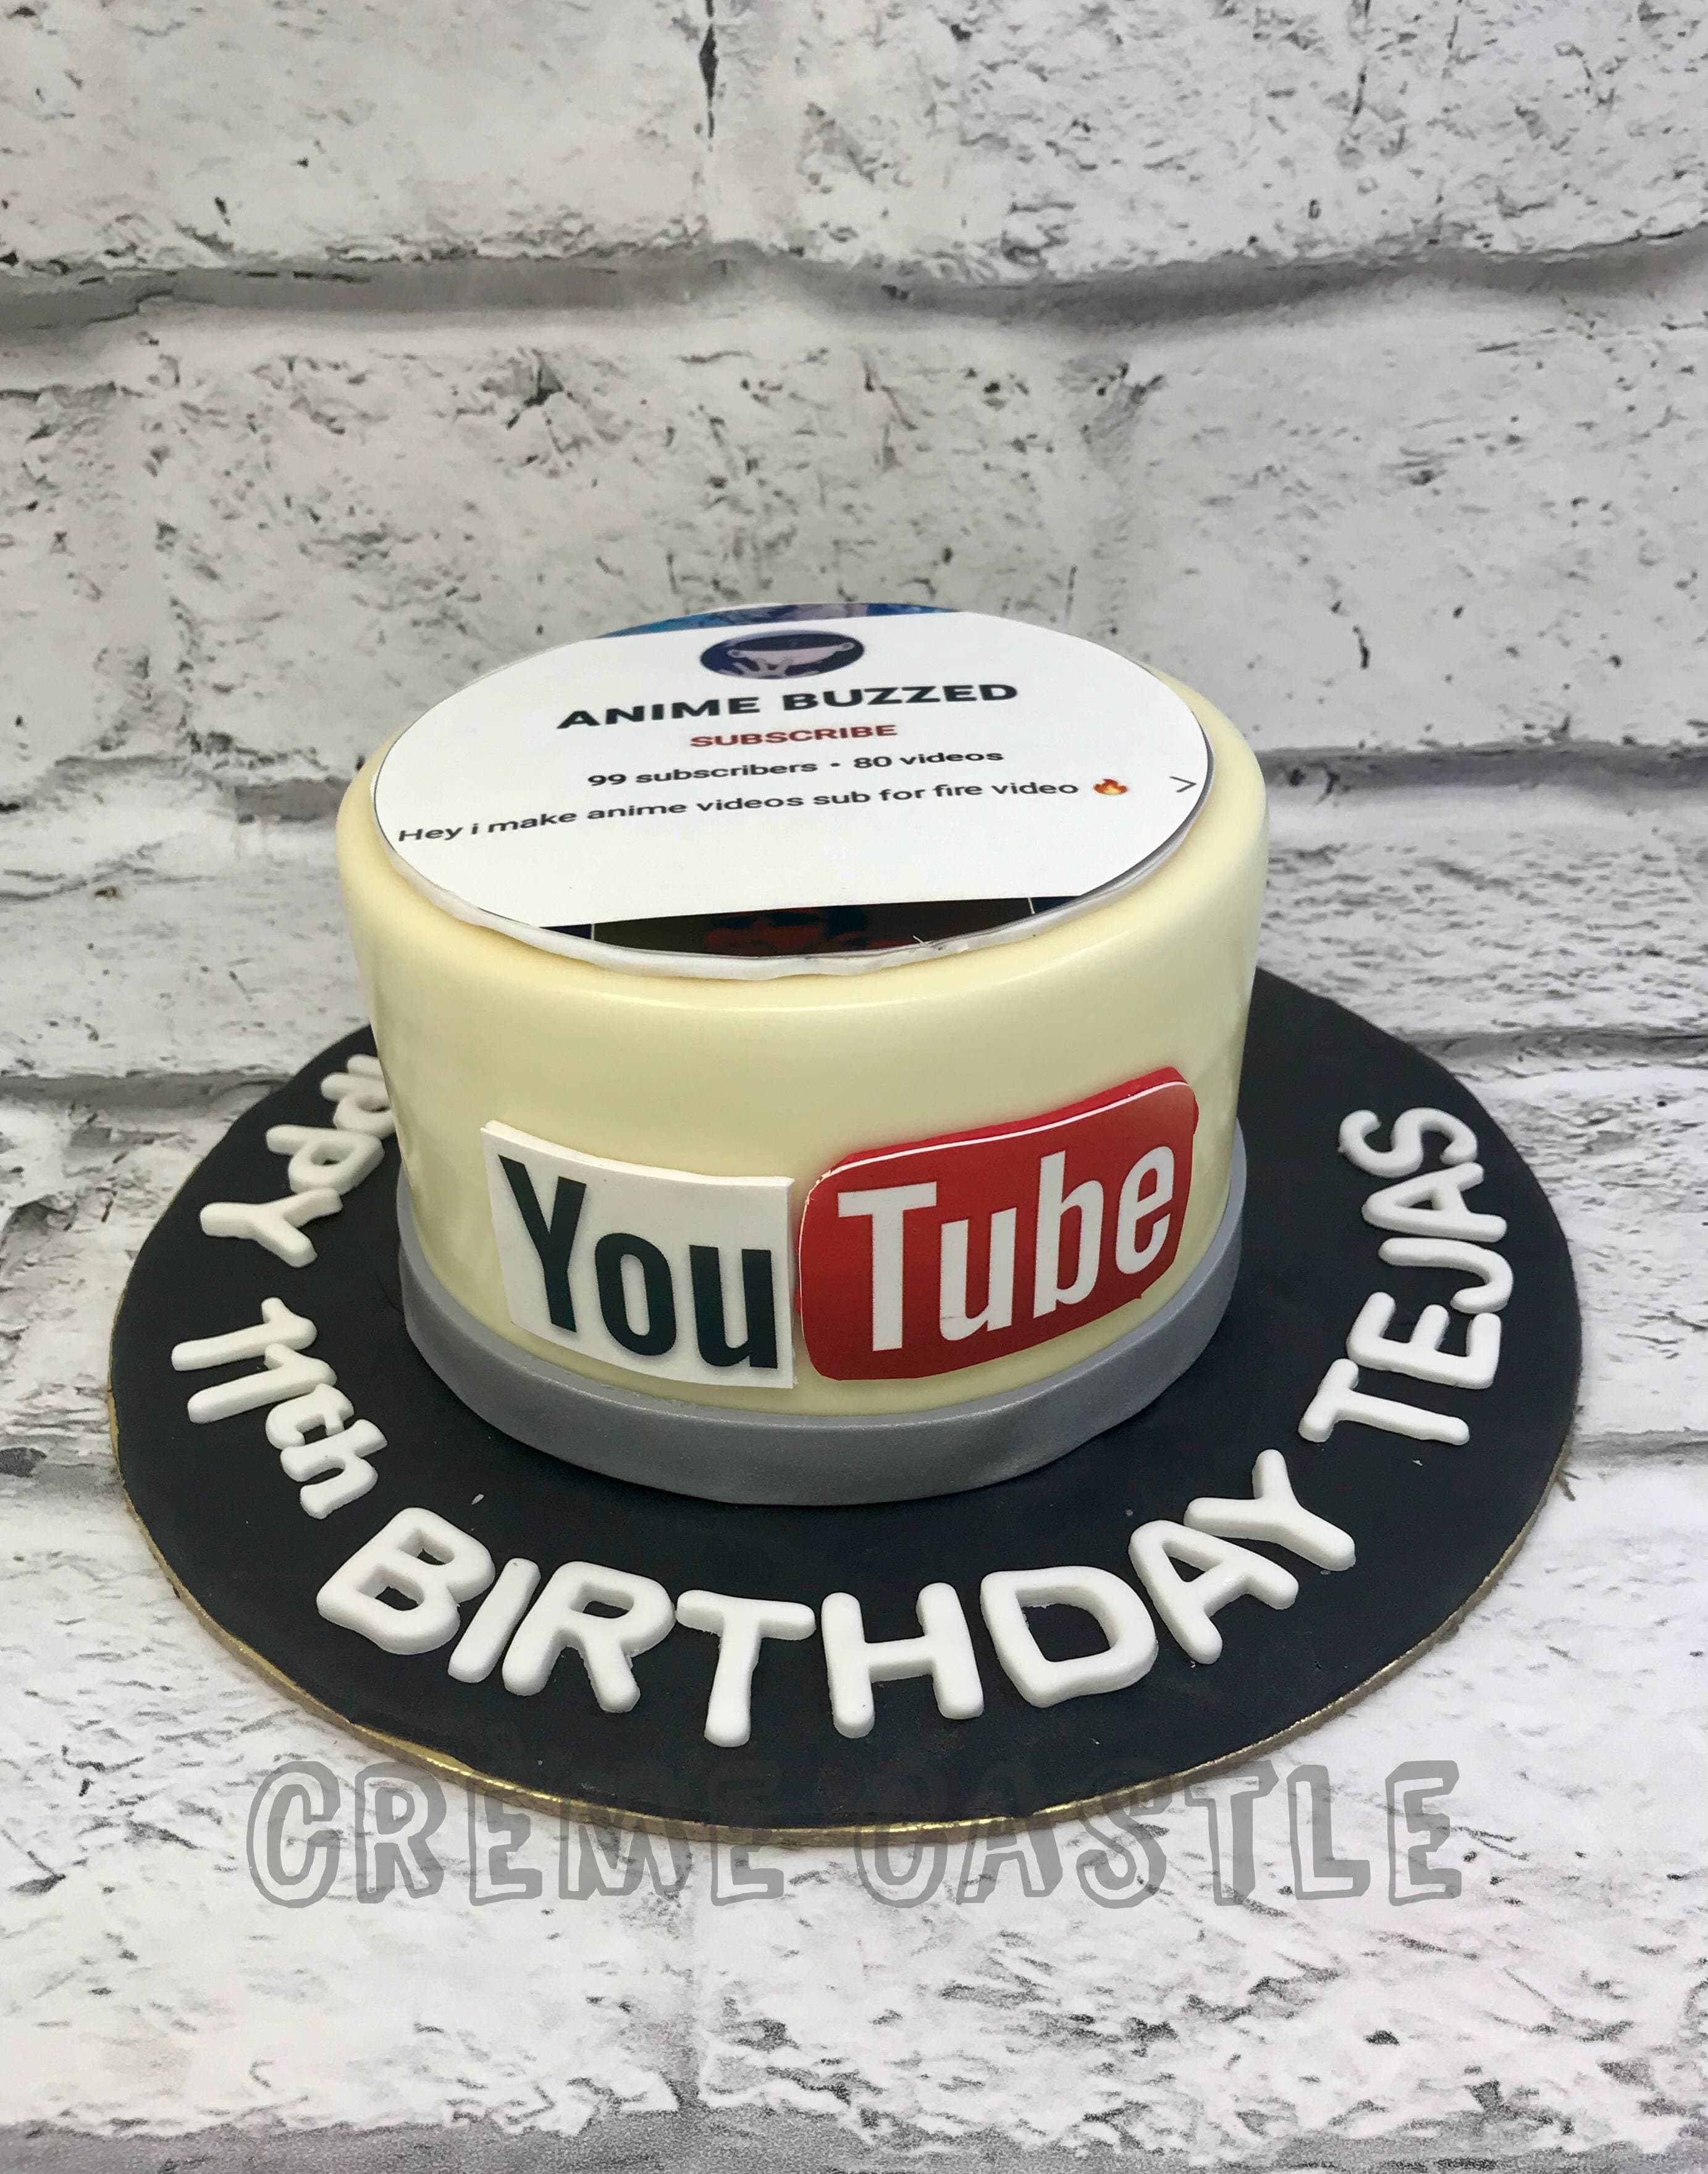 You Tube theme cake🎂.. Out for a... - Poo's cake story | Facebook